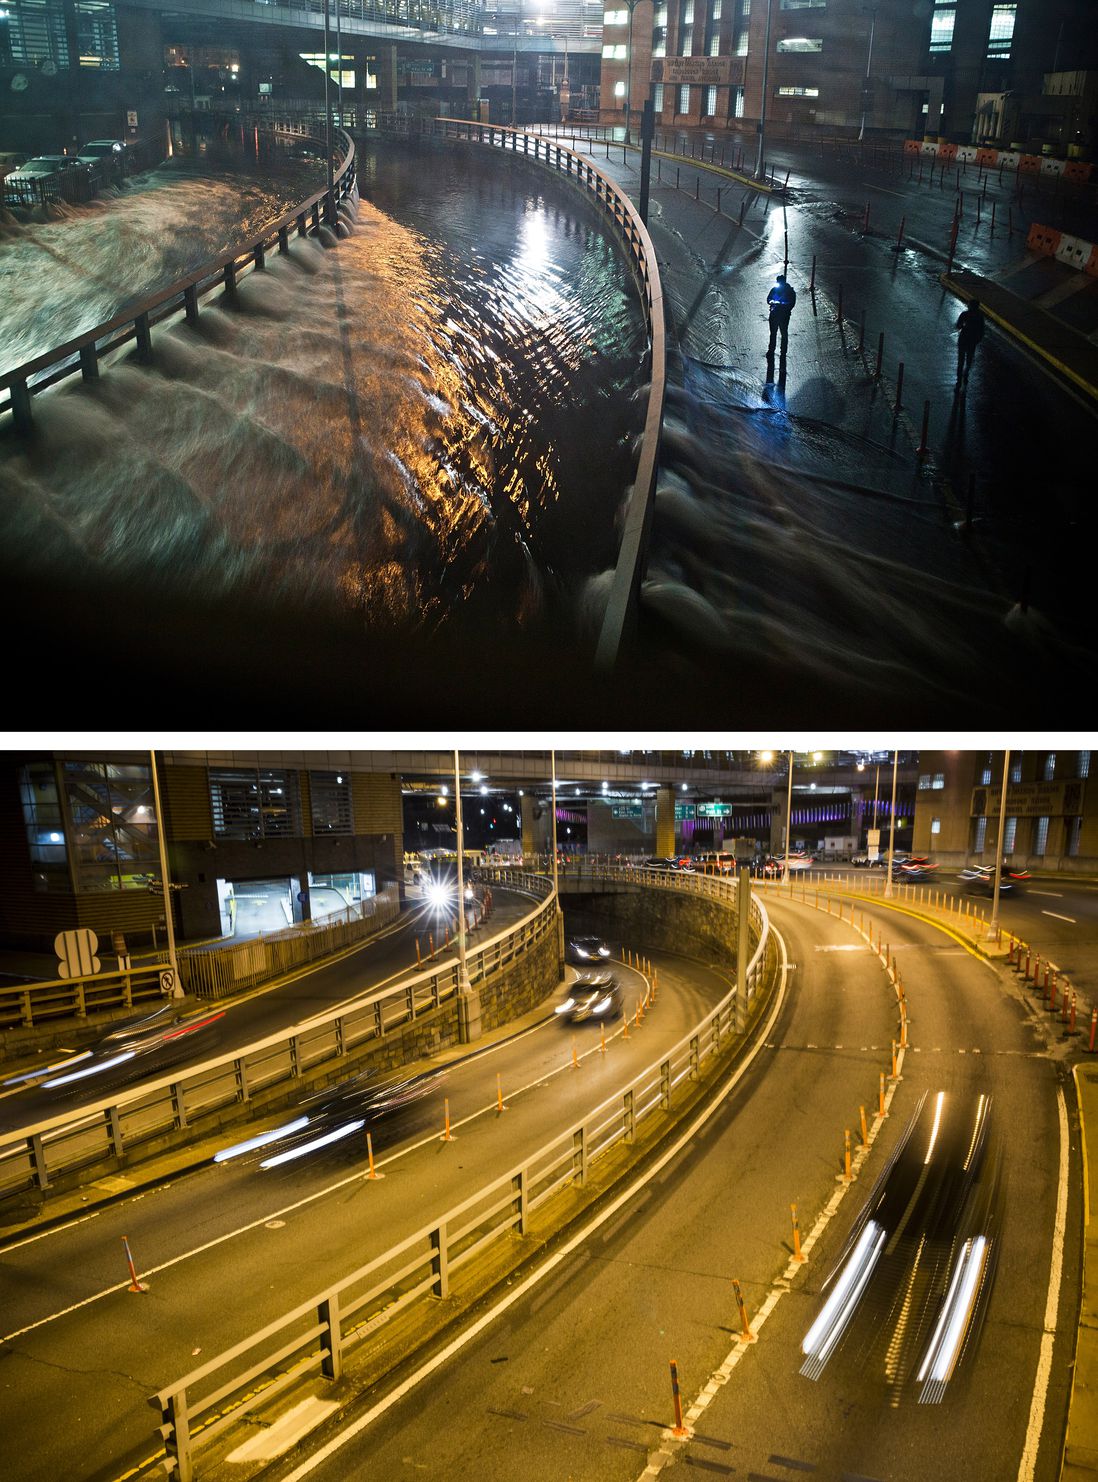 [Top] Rising water caused by Superstorm Sandy rushes into the Carey Tunnel (aka the Brooklyn Battery Tunnel) October 29, 2012 in New York City. [Bottom] Cars use the Carey Tunnel October 22, 2013 in New York City.